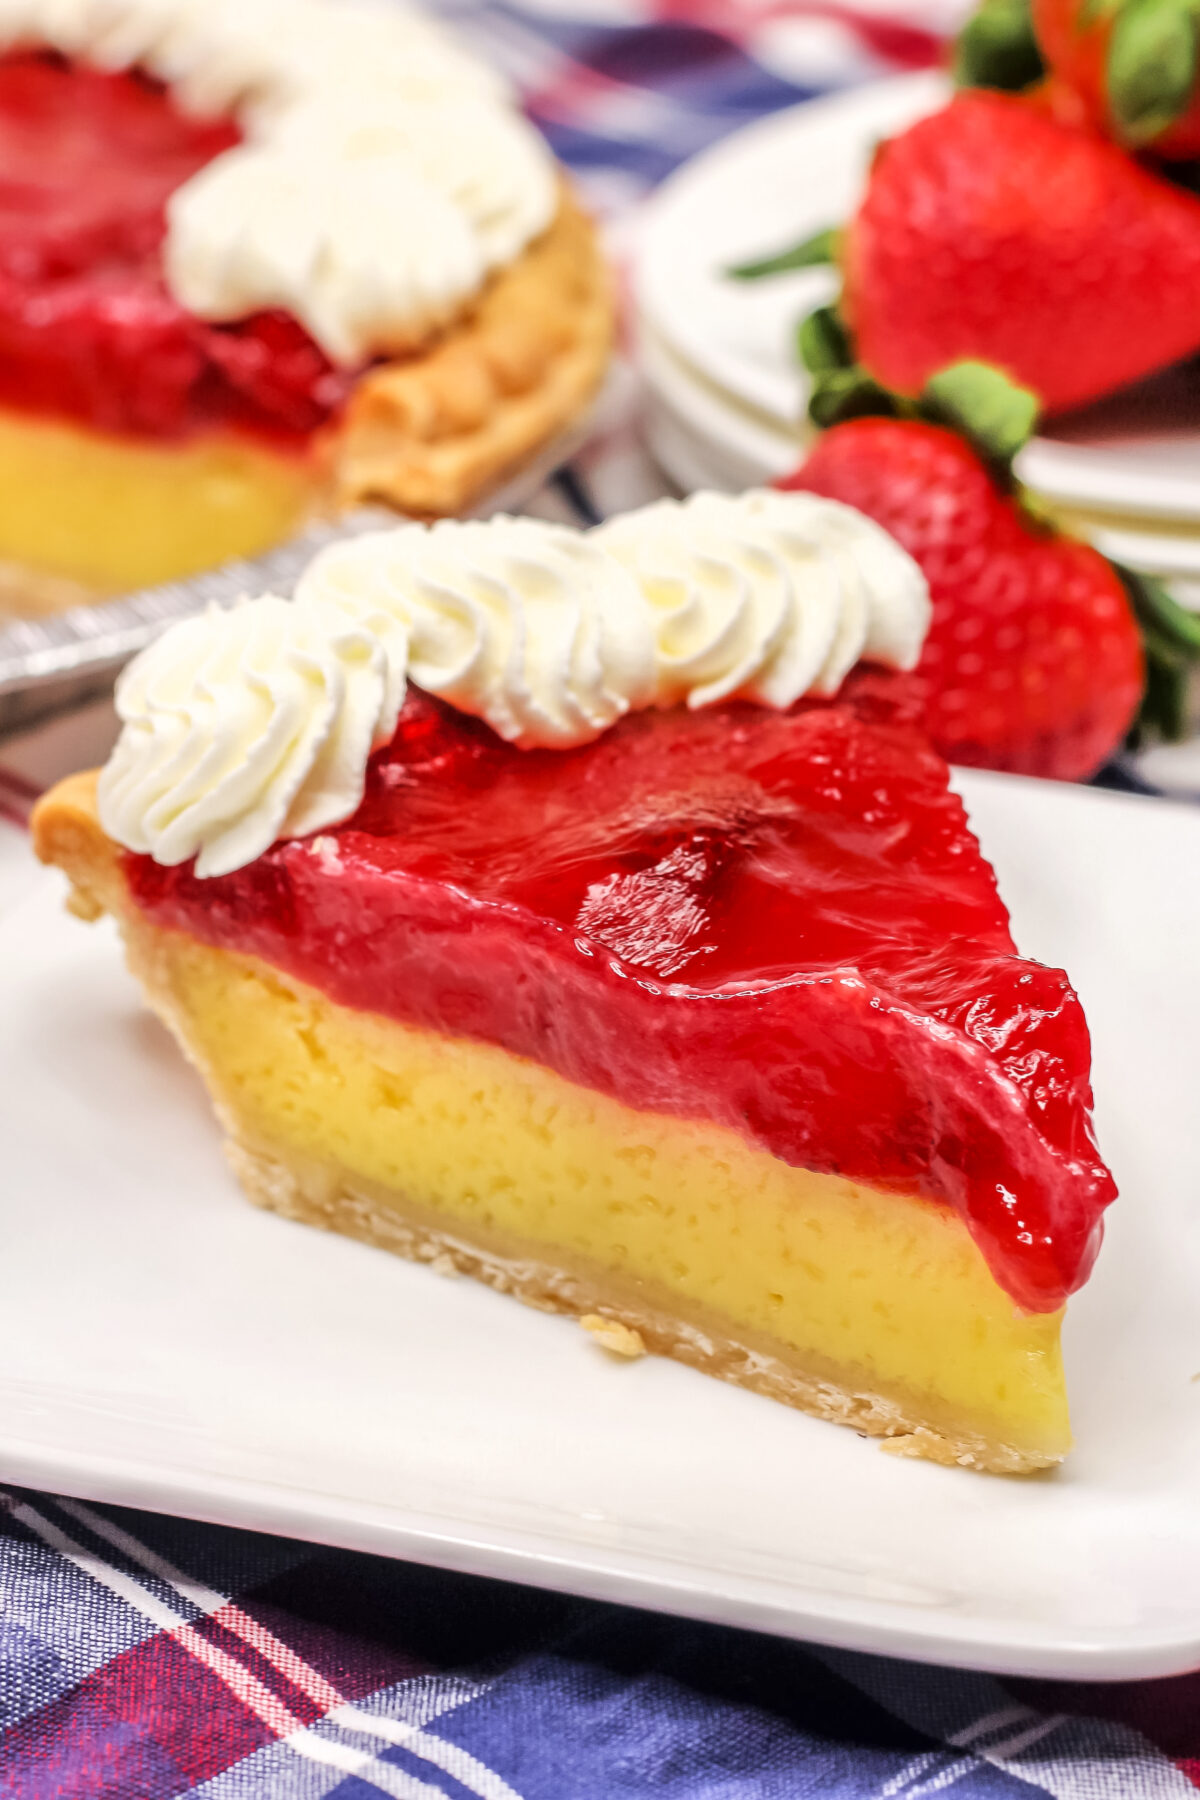 Smooth, custardy, tangy and sweet, this Strawberry Lemon Chess Pie is made with the classic recipe then topped with strawberry pie filling!